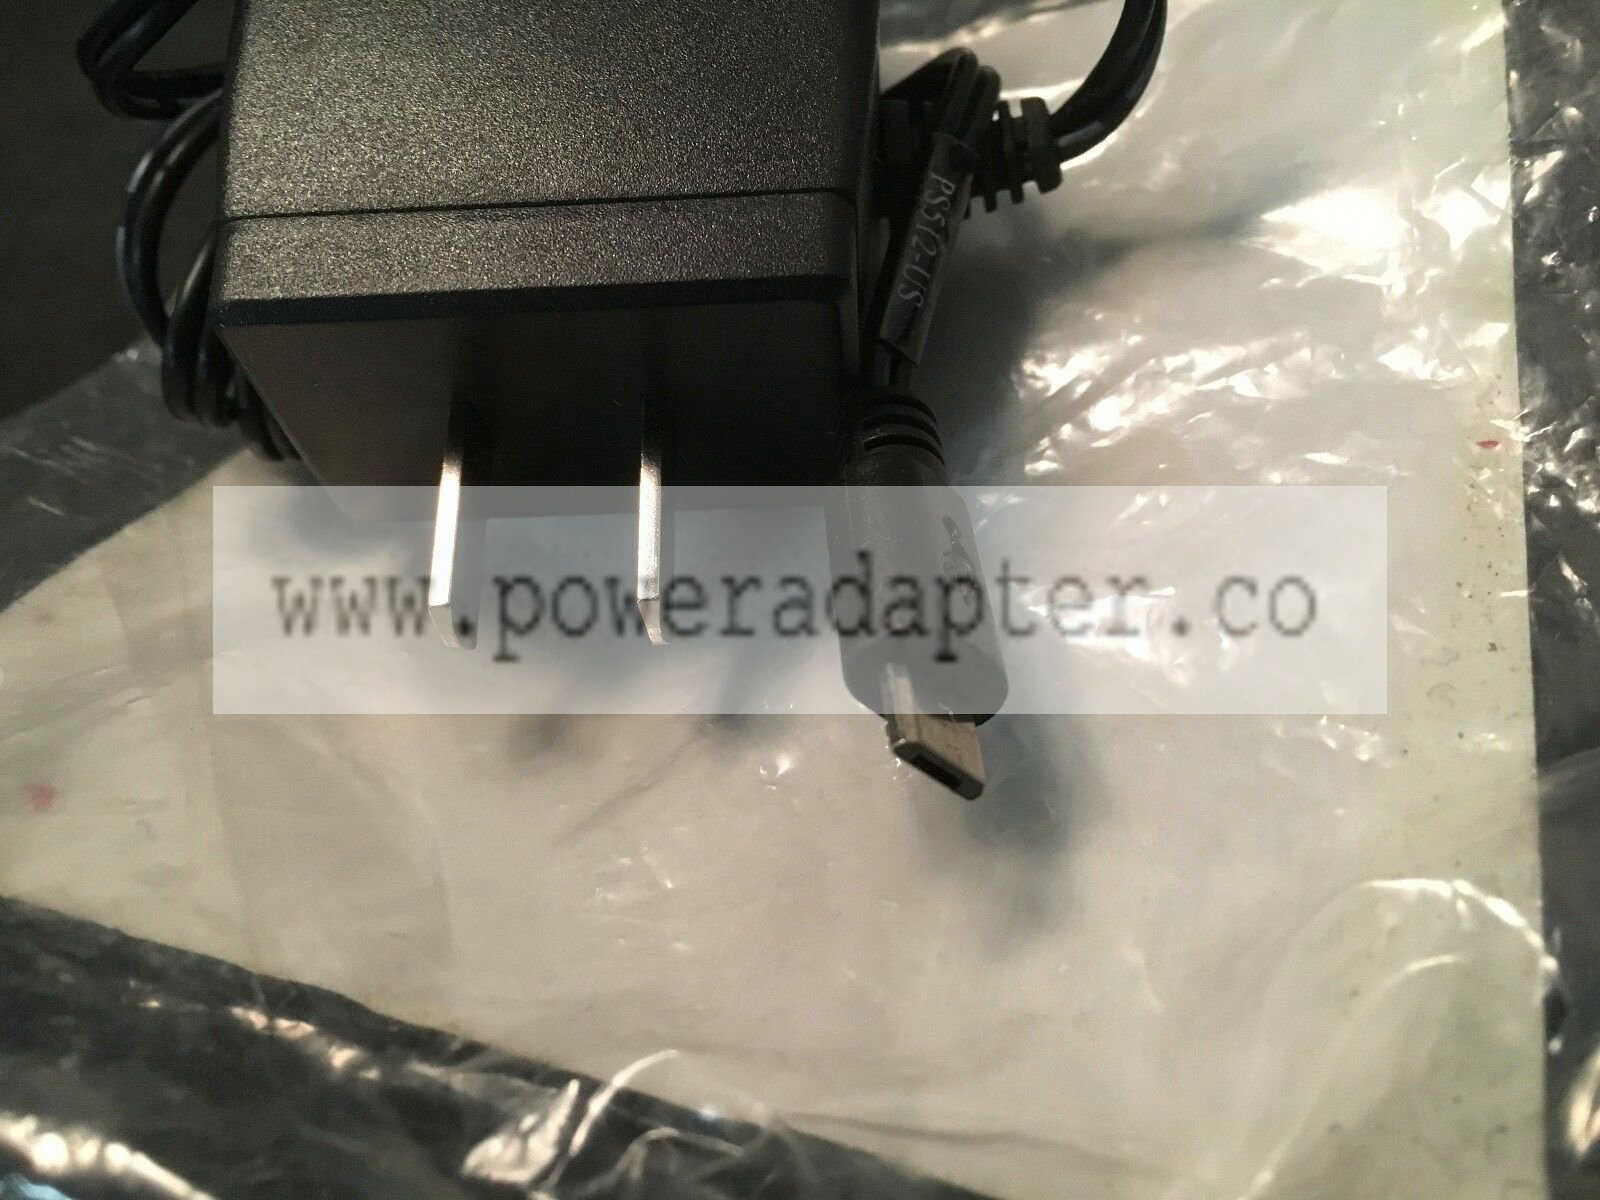 InVue ps512-us 5.3v micro usb power supply AC Adapter 5V-1200mA HU10263-11010A Brand: InVue Type: AC Adapter MPN: H